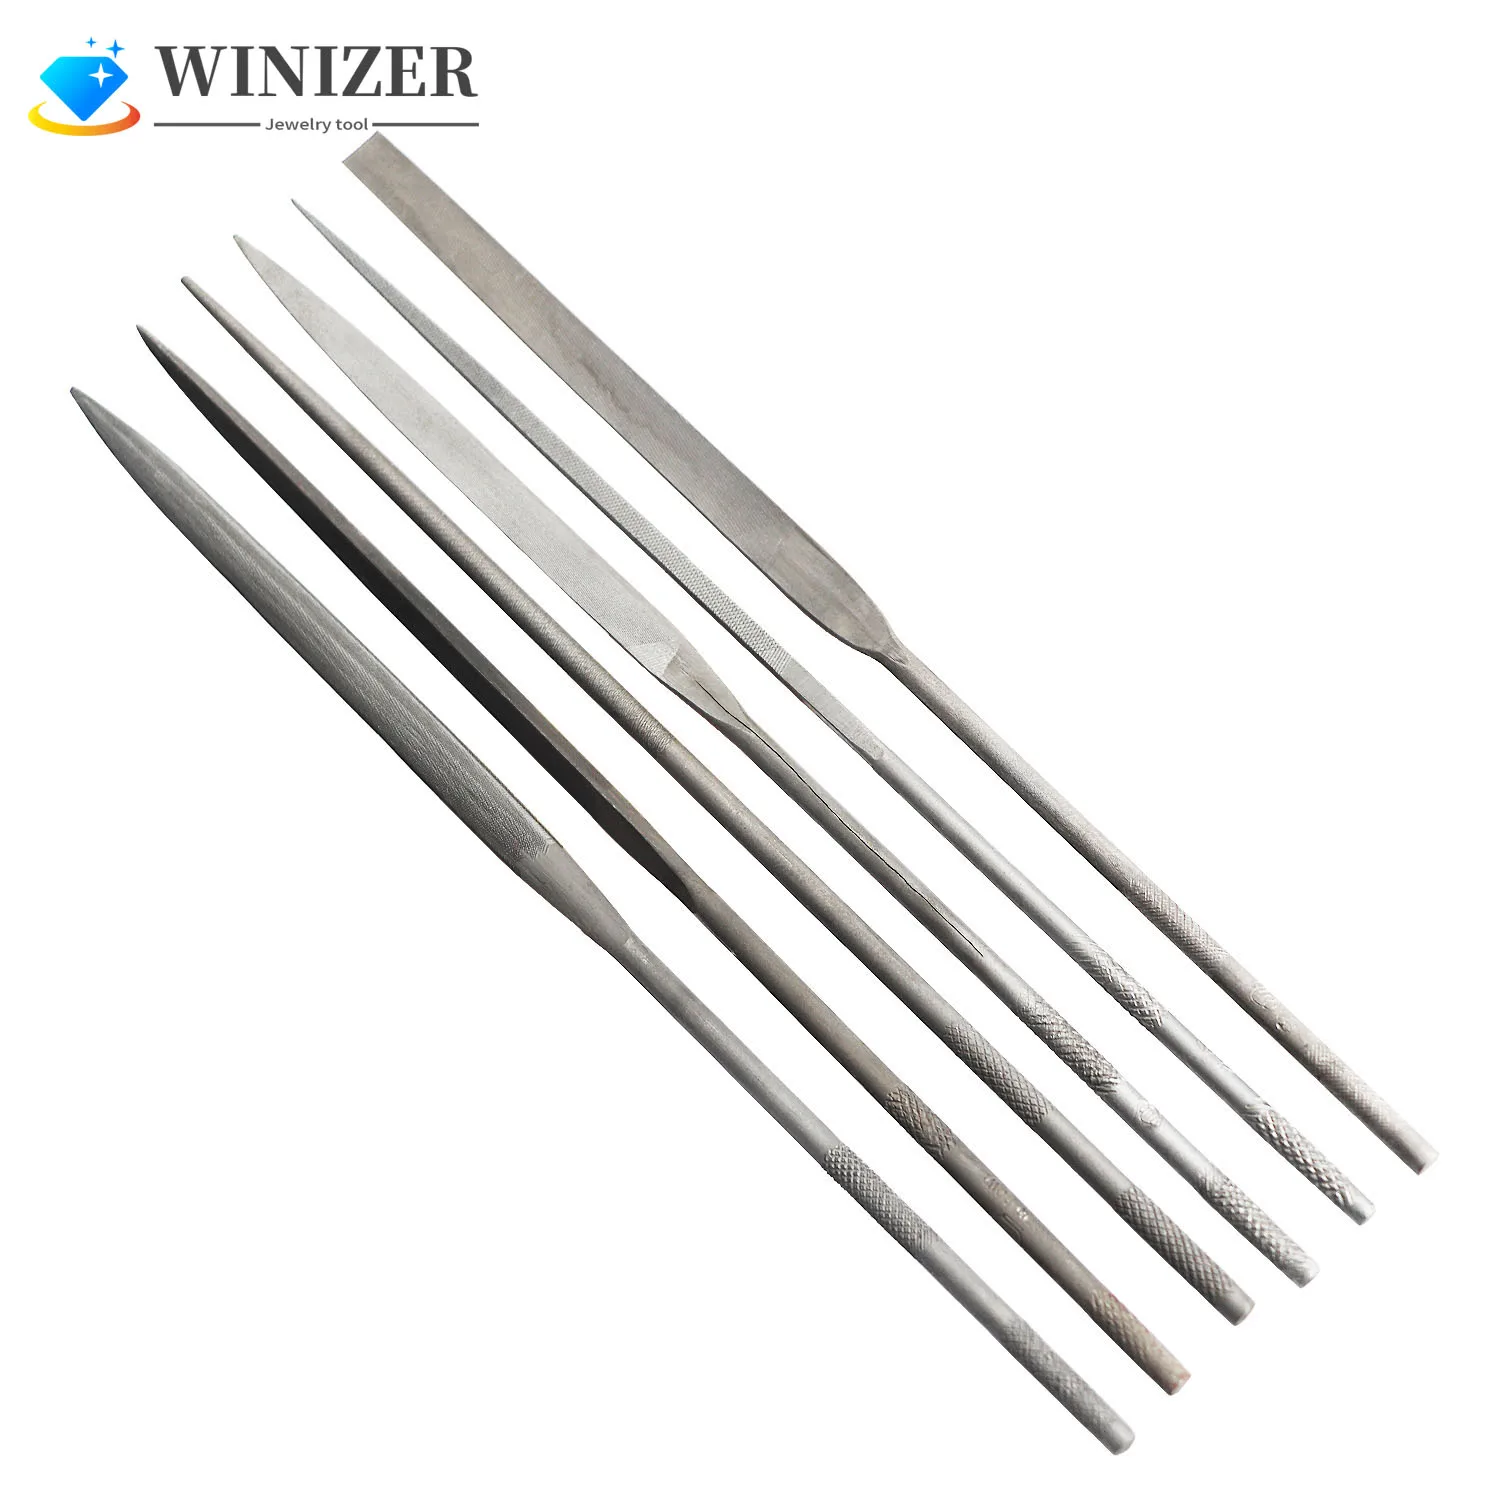 

6Pcs Needle File Set High Carbon Steel File Set for Filling and Sanding Wood, Metals Jewelry Plastic Jewelry Wood Carving Craft